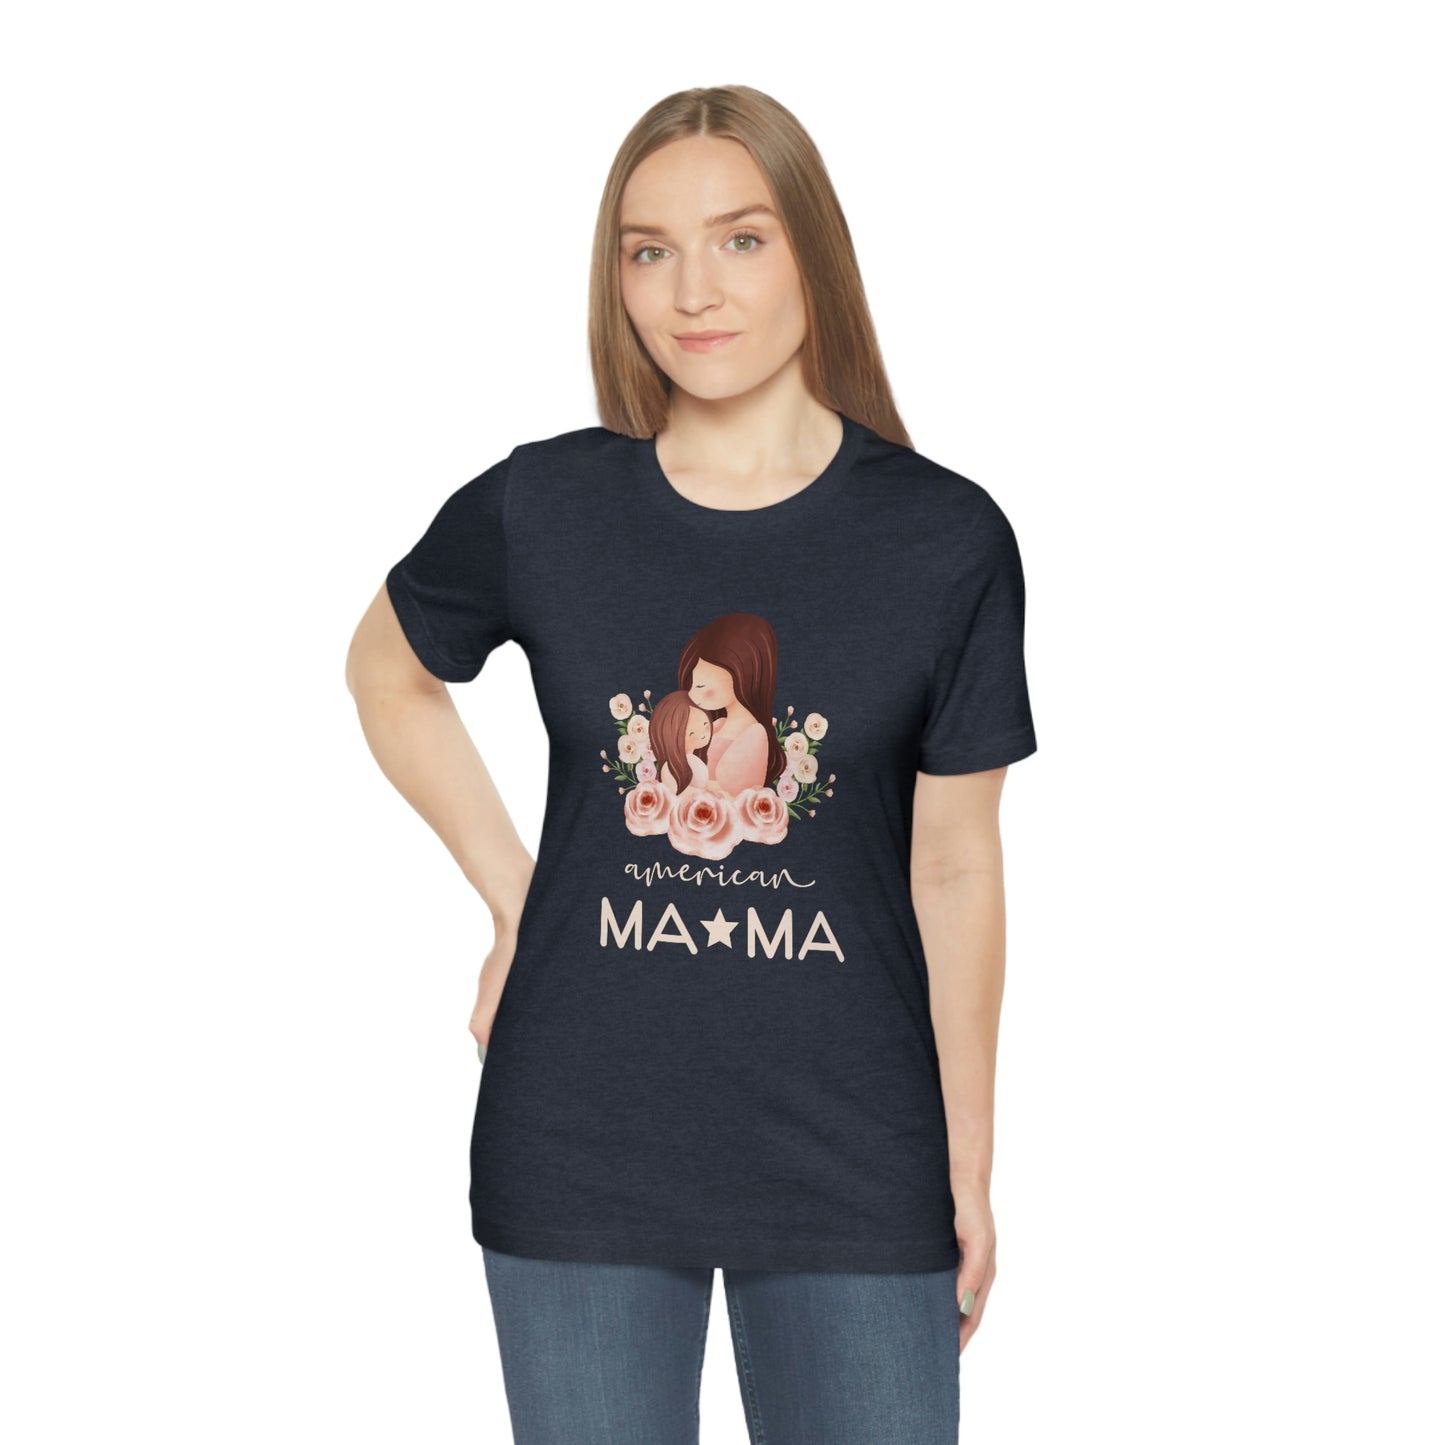 Get ready to make a statement with our American Mom heather navy jersey short sleeve t-shirt. A perfect Mother's Day gift for any mom. Celebrate her with this unique and stylish t-shirt.